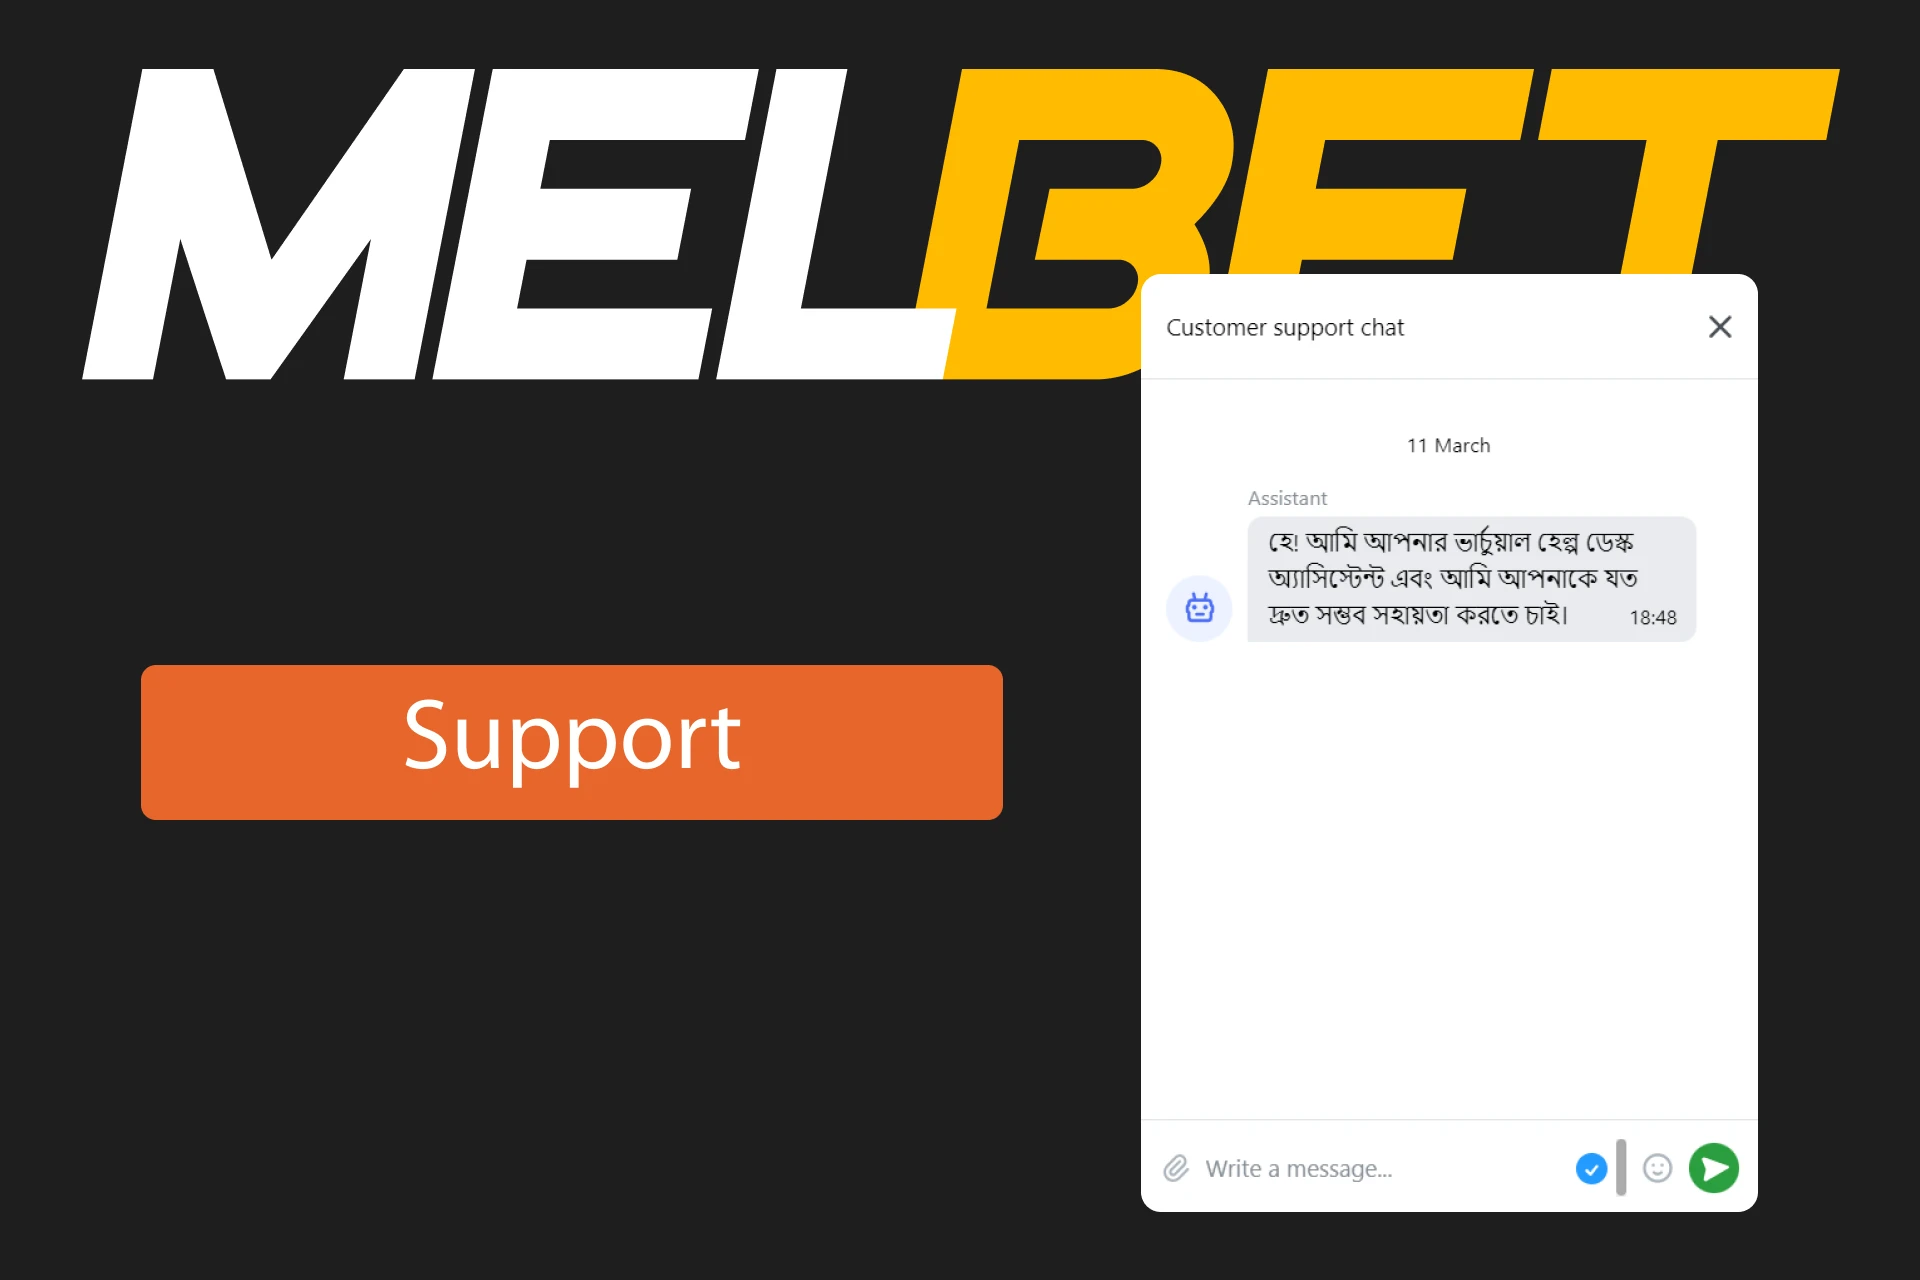 Contact Melbet support if you have any questions or problems.